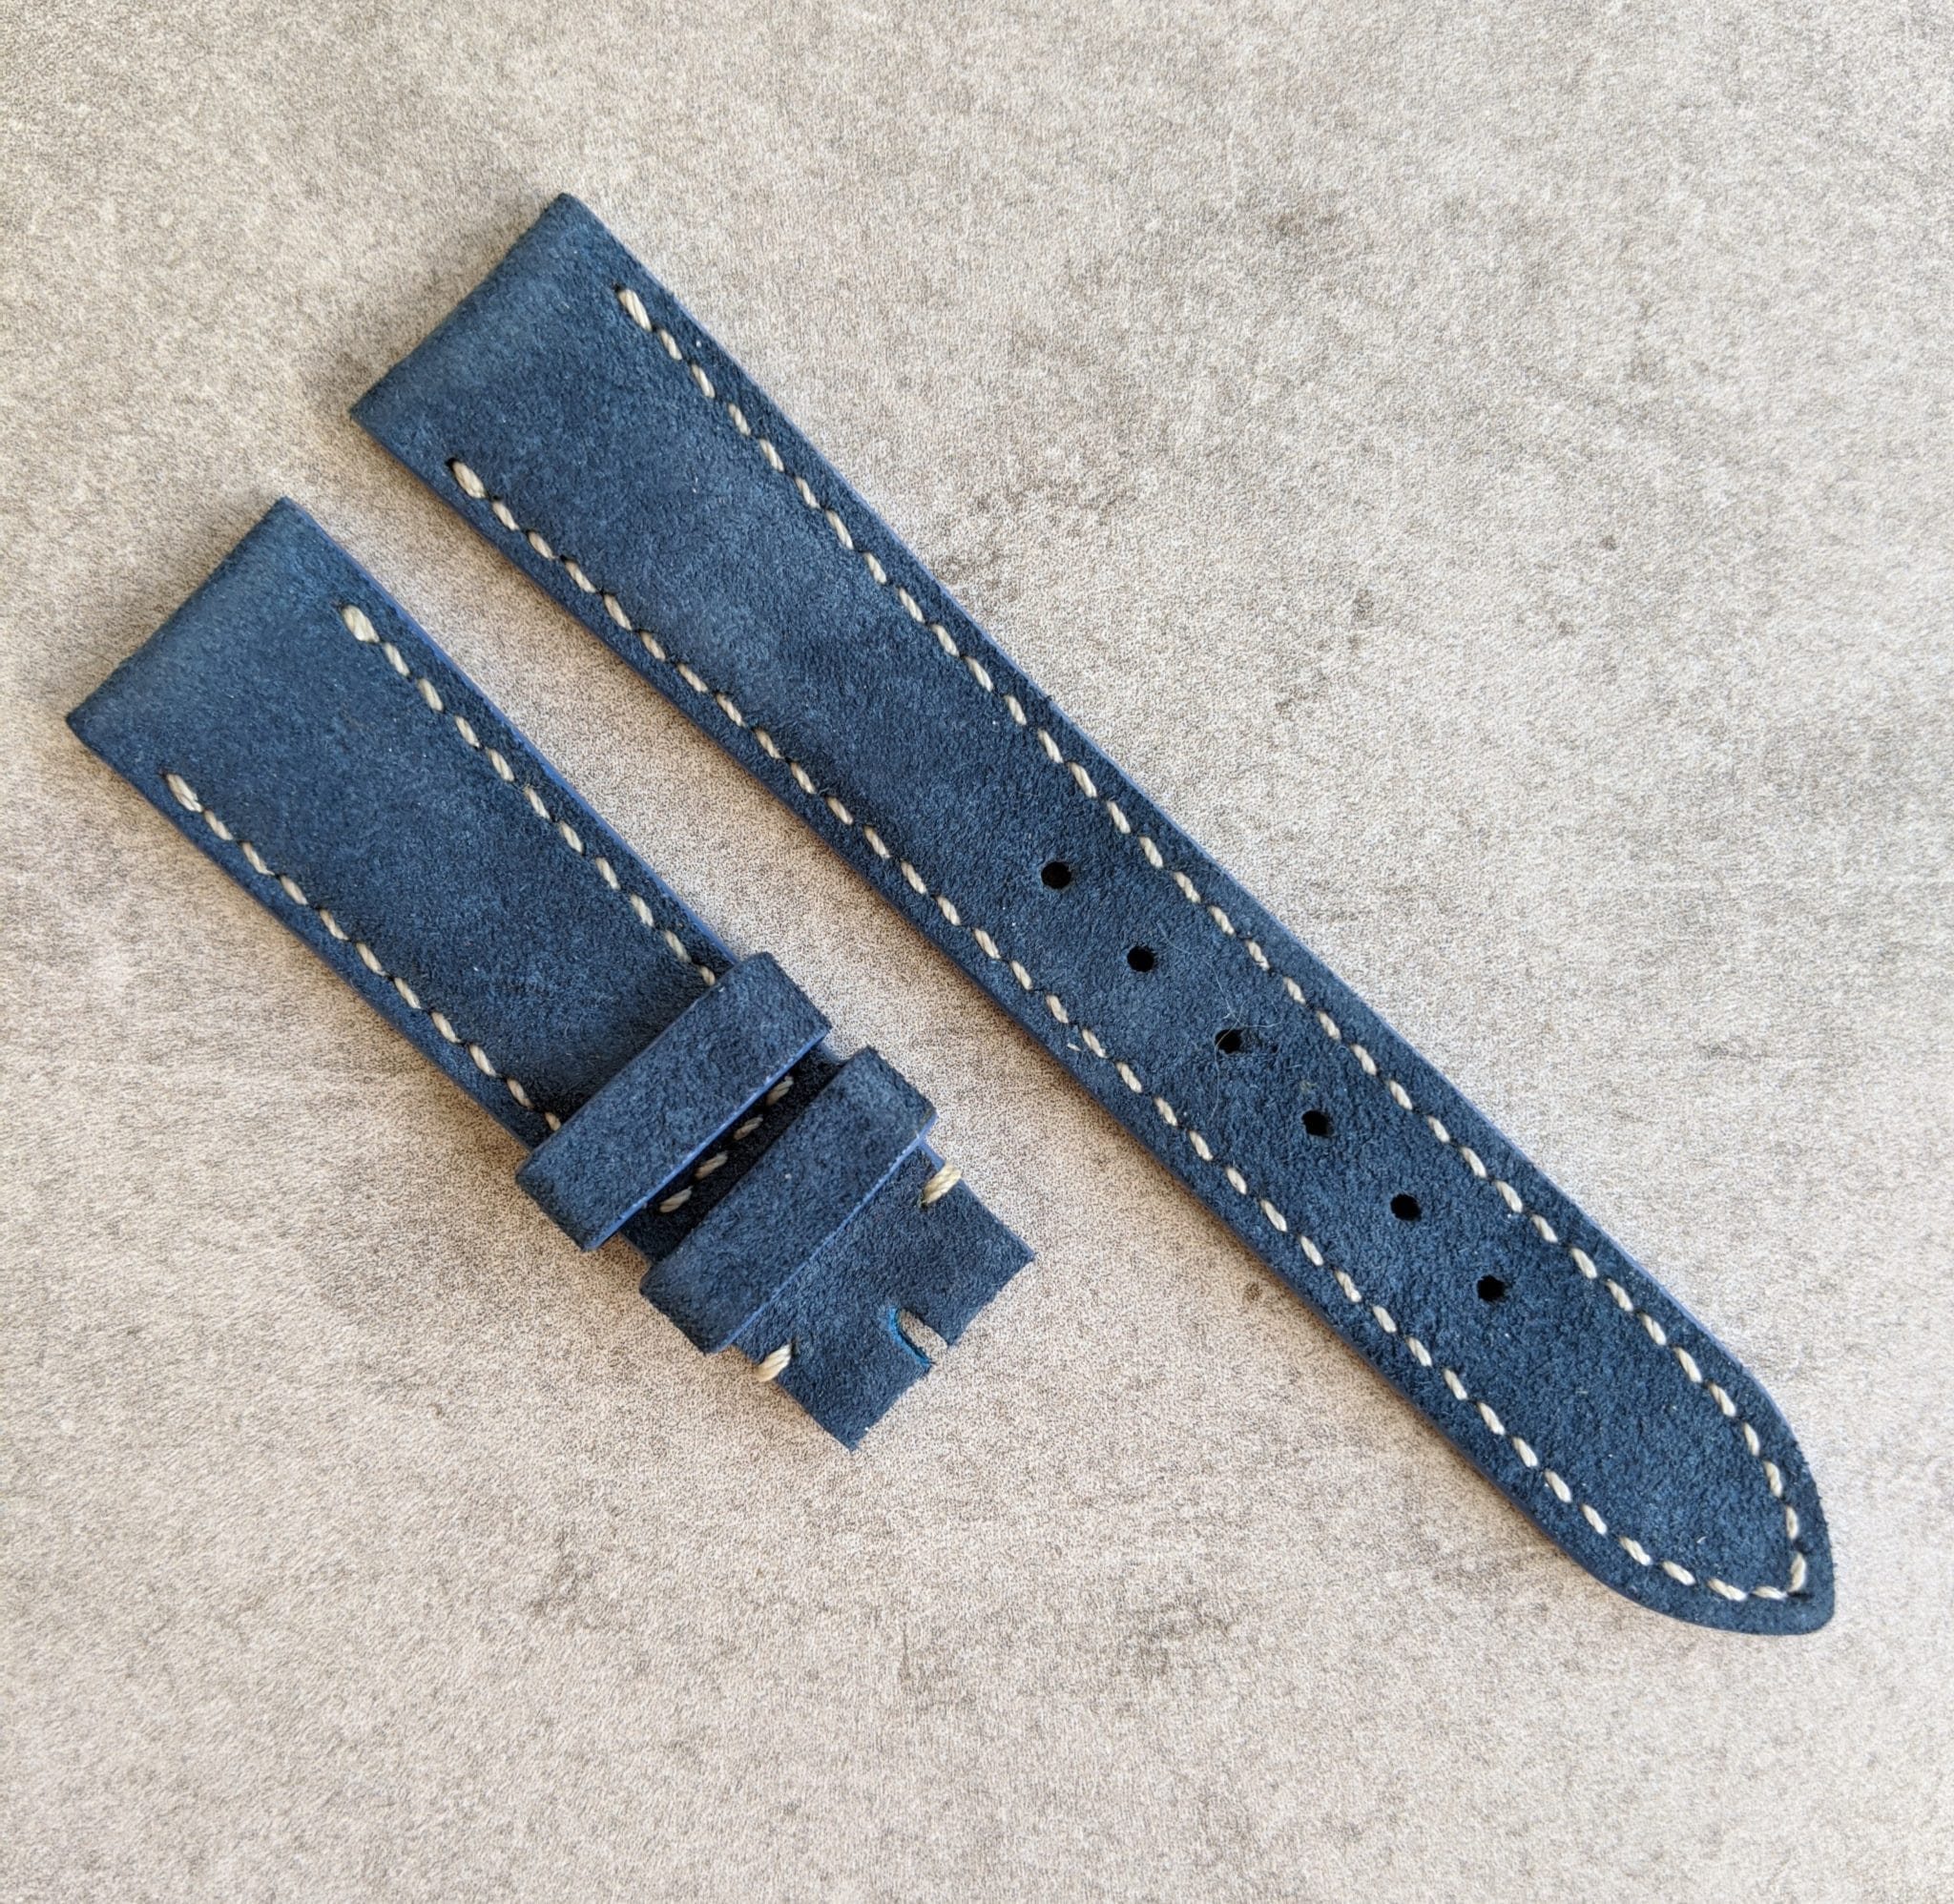 Padded Suede Leather Watch Strap - Denim Blue - The Strap Tailor